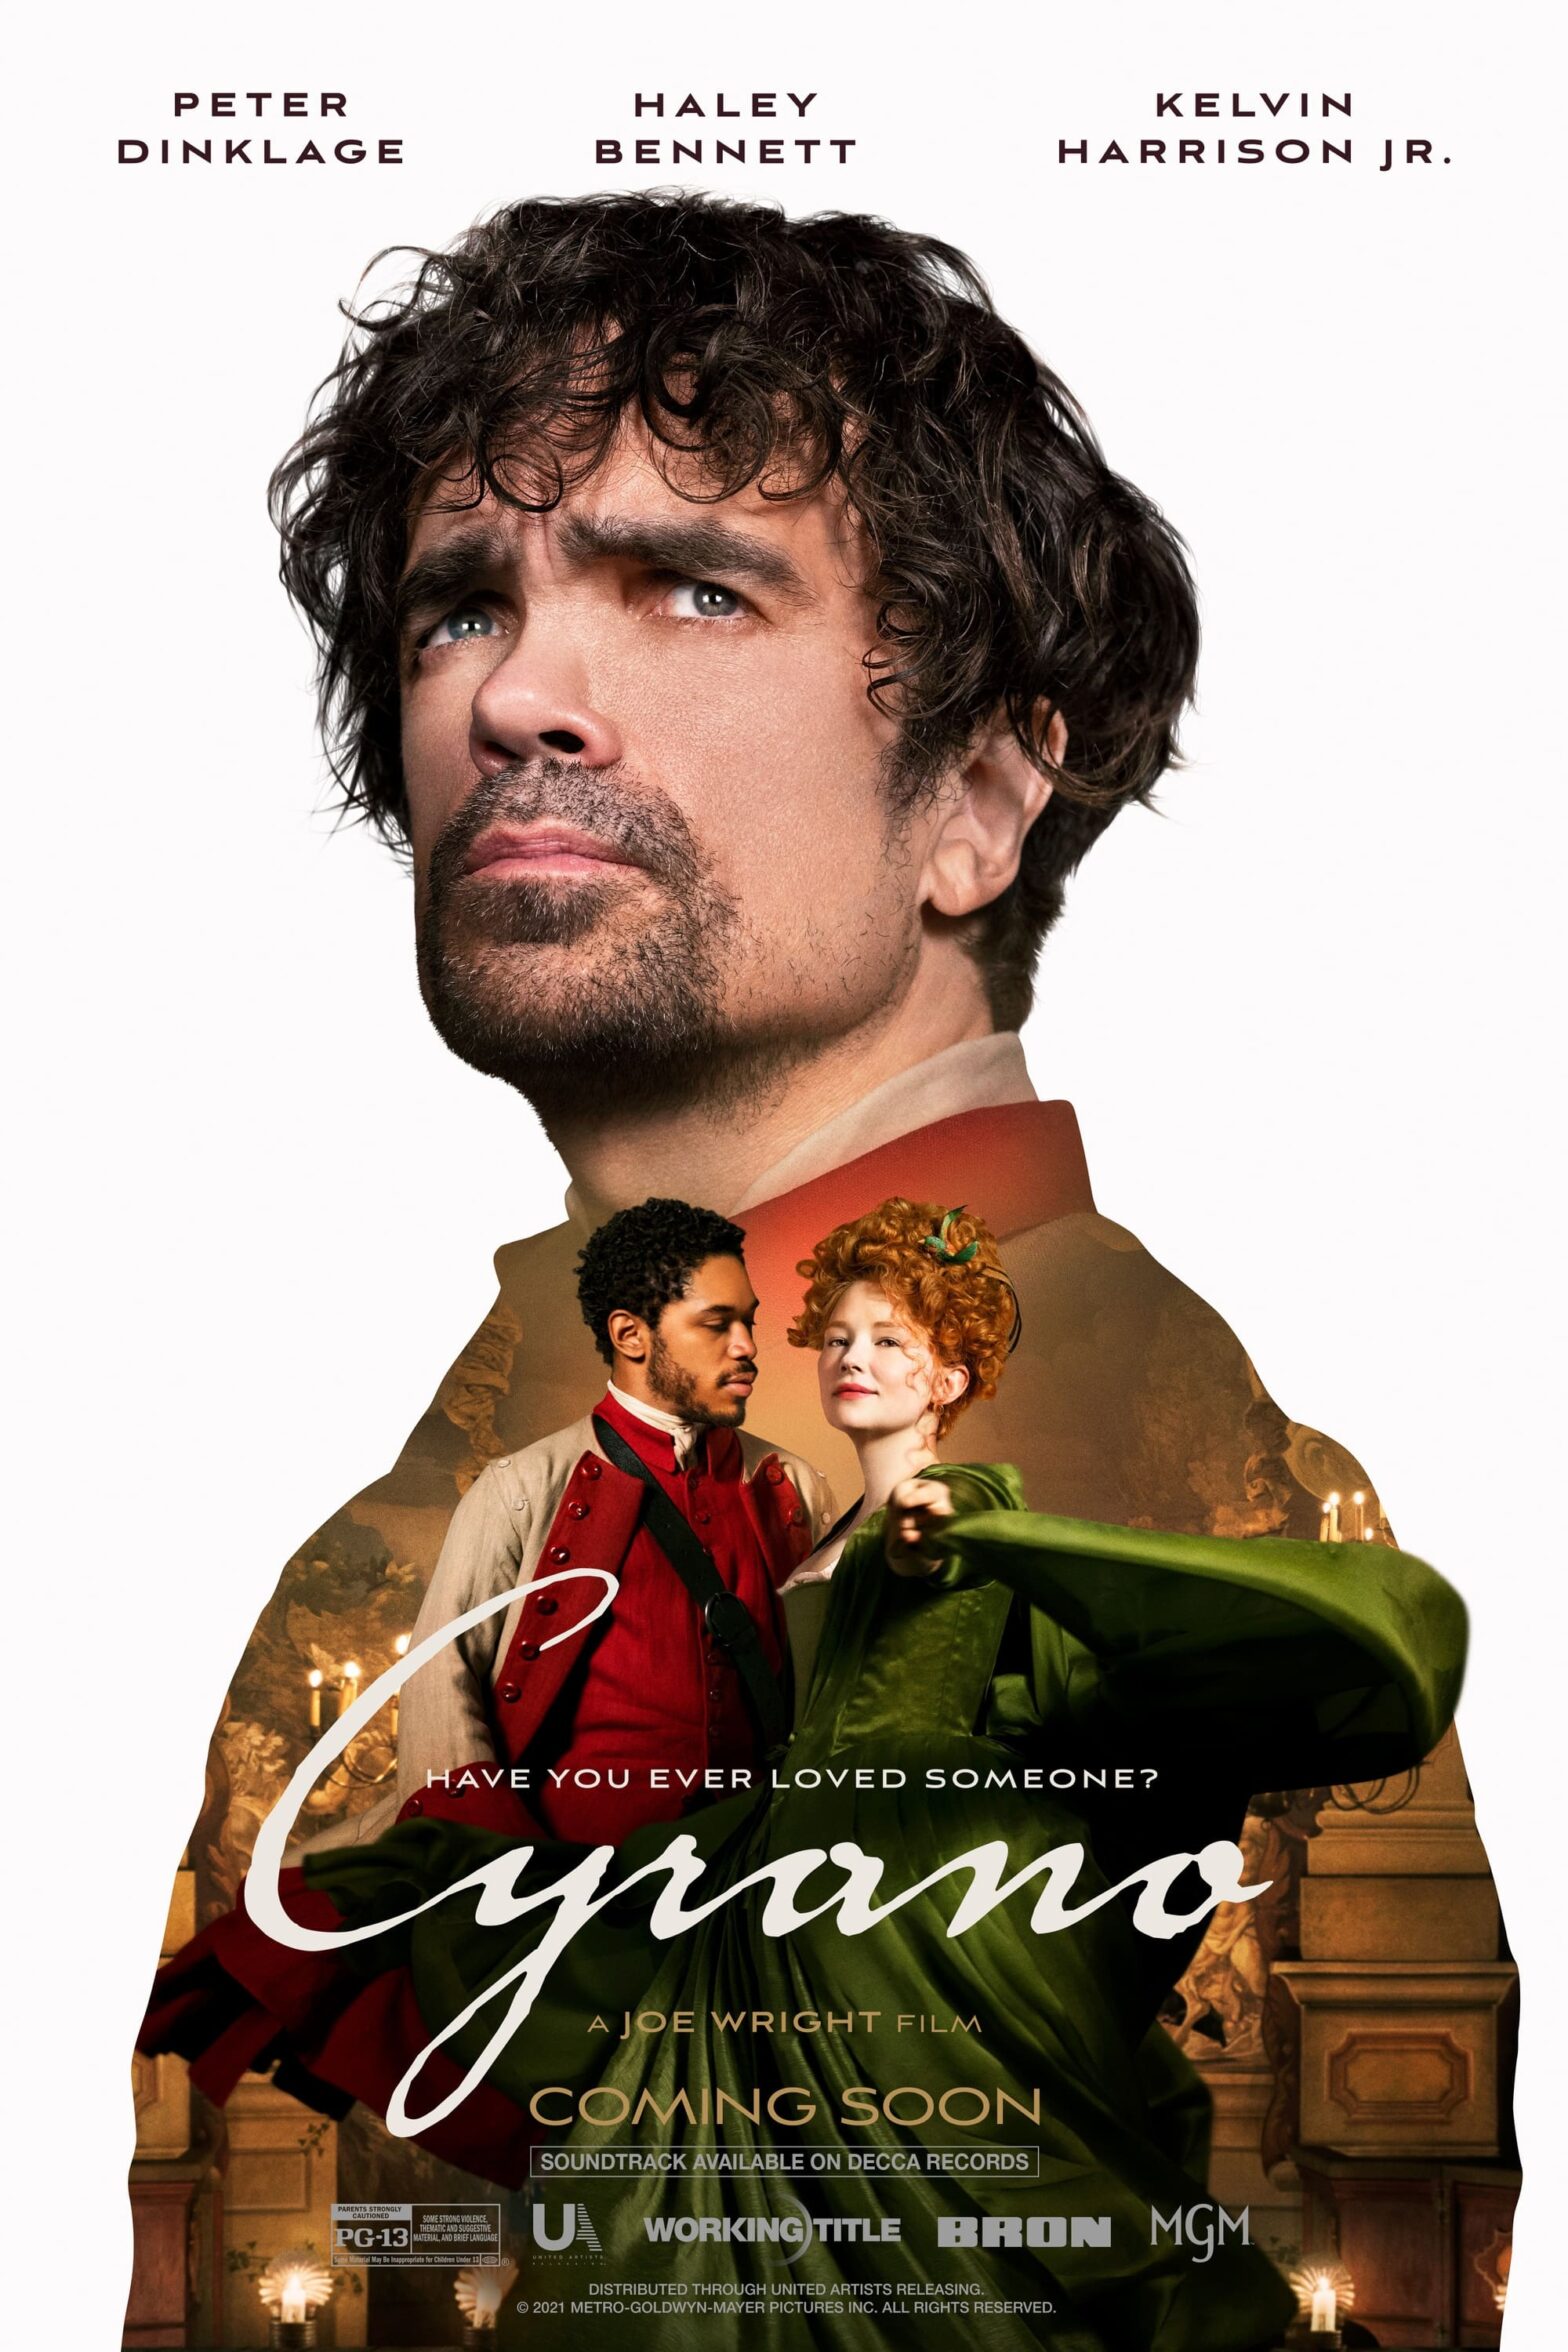 Poster for the movie "Cyrano"